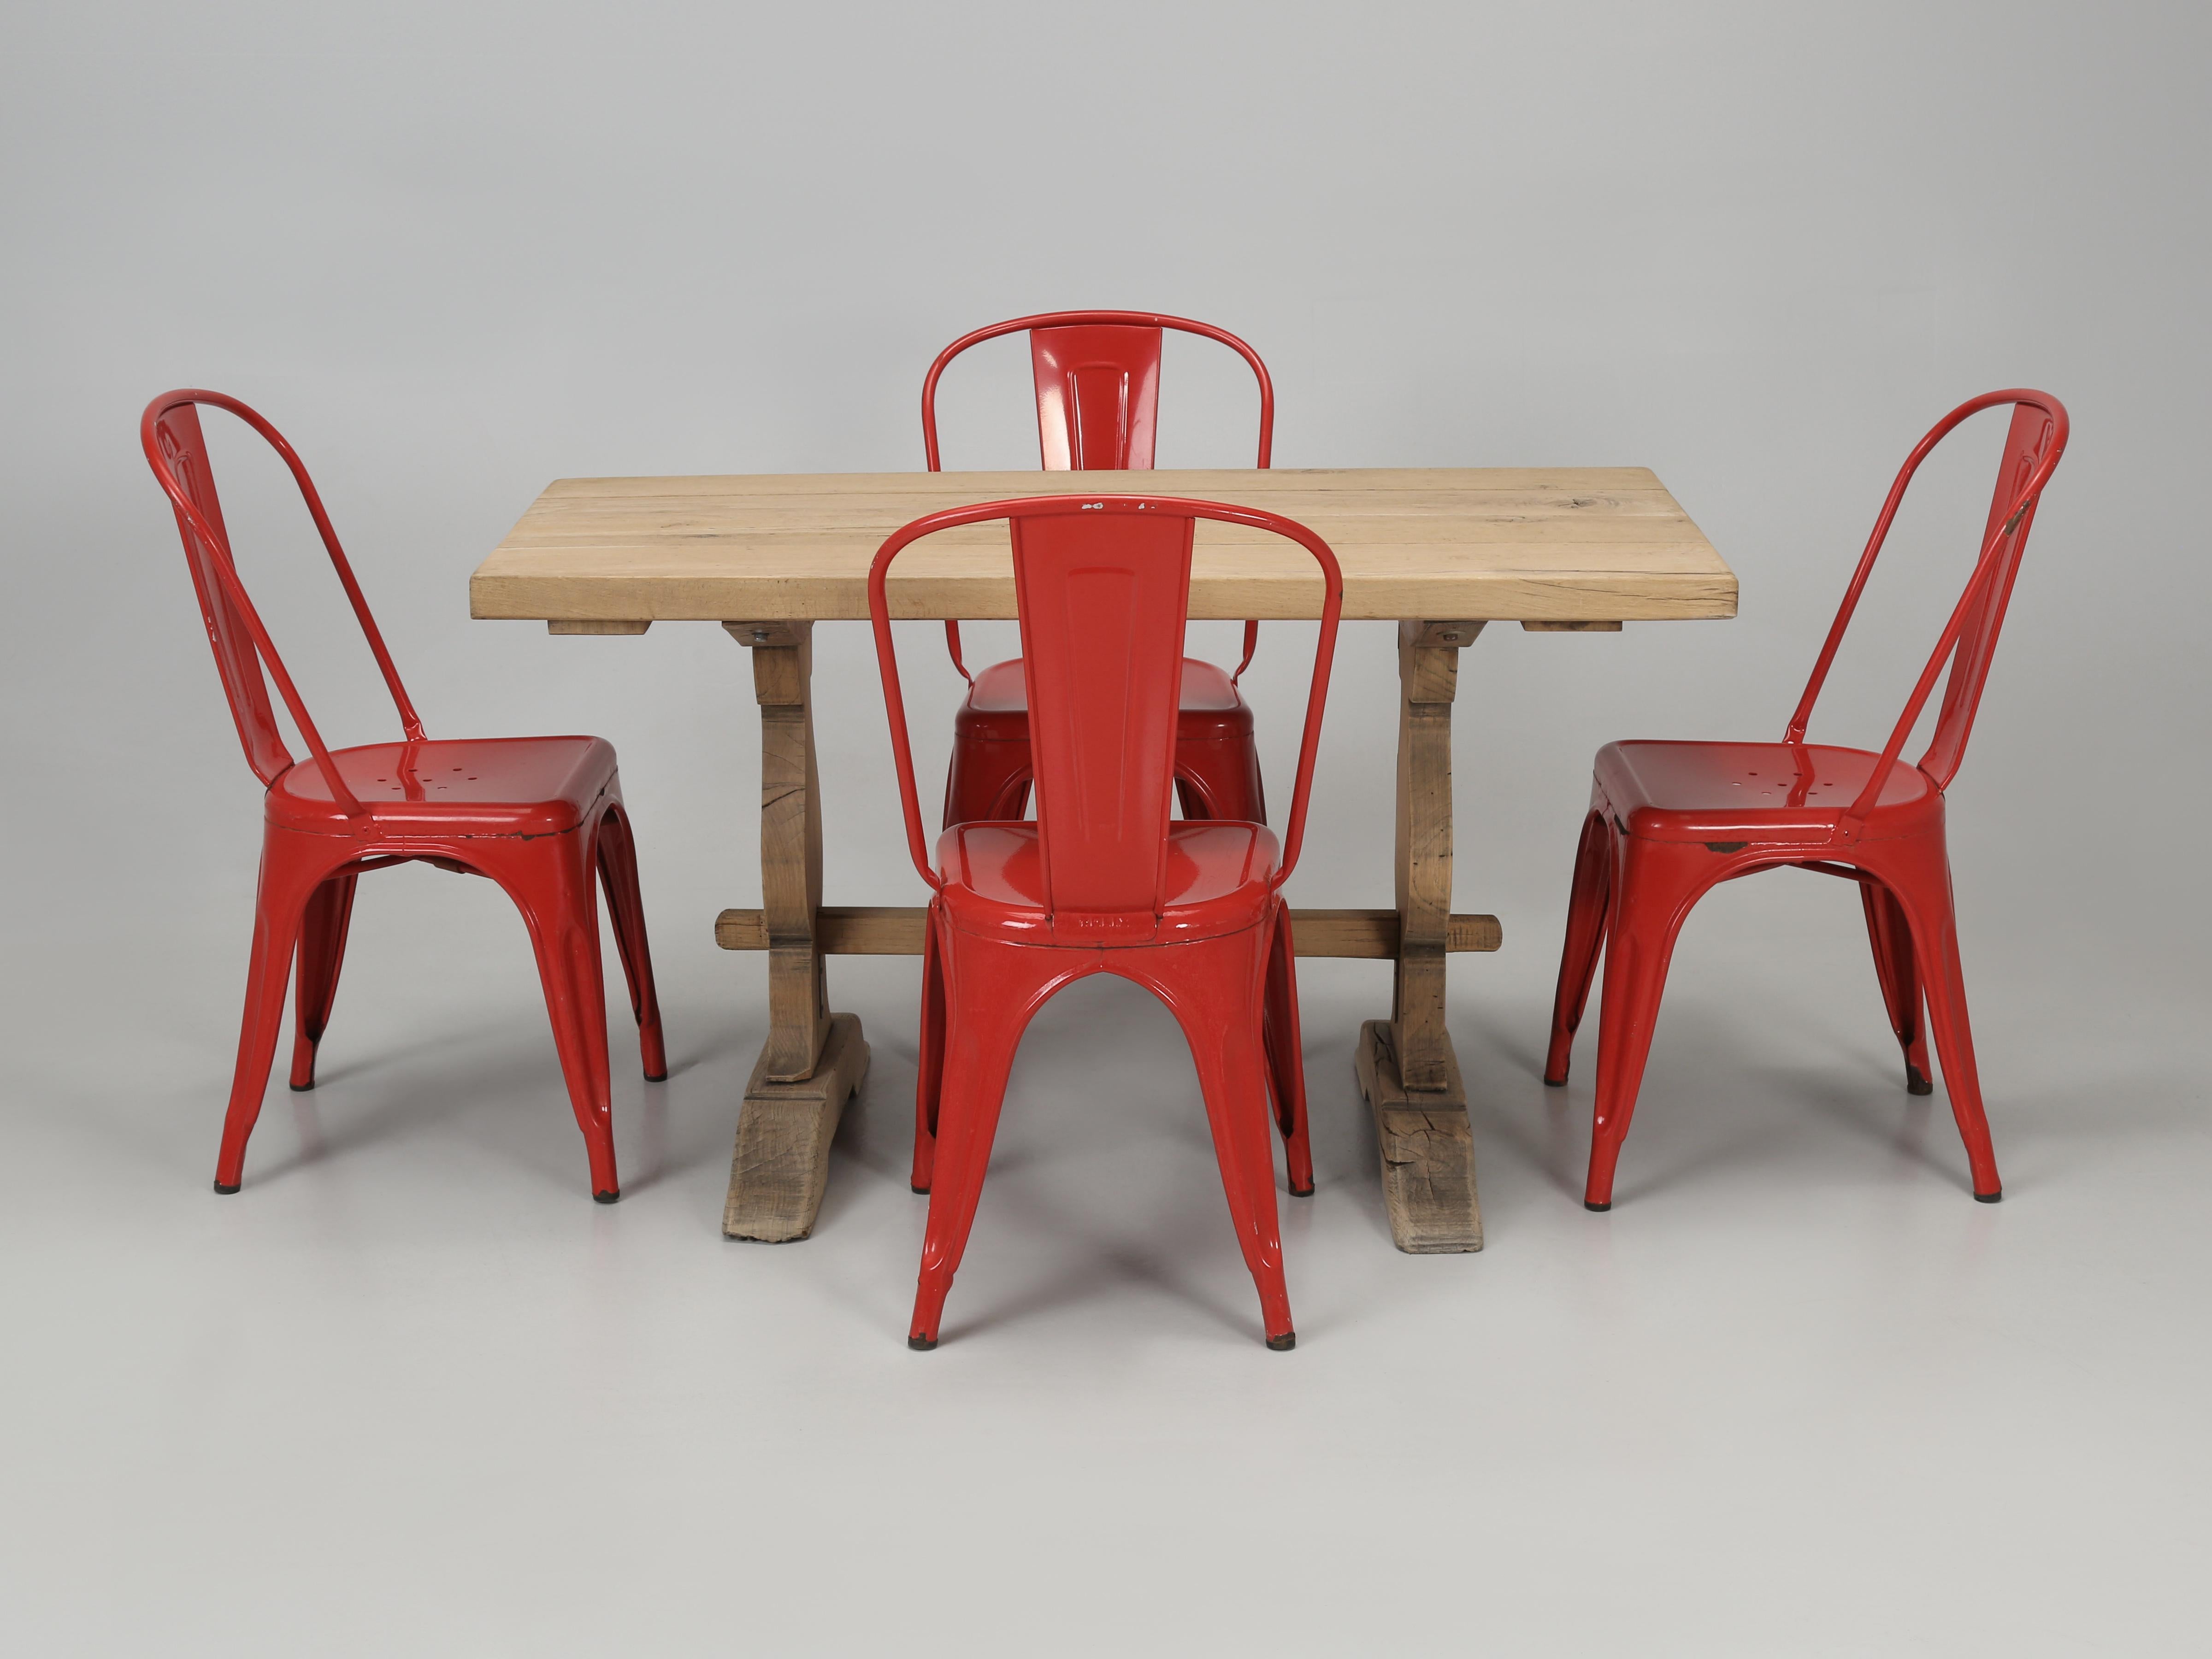 French Bistro table with (4) Authentic Vintage Tolix steel chairs. The Bistro Table was used in a French Bistro for over 100-years, while the Vintage Tolix Steel Stacking Chairs are probably closer to 60-years old. Should you prefer a different